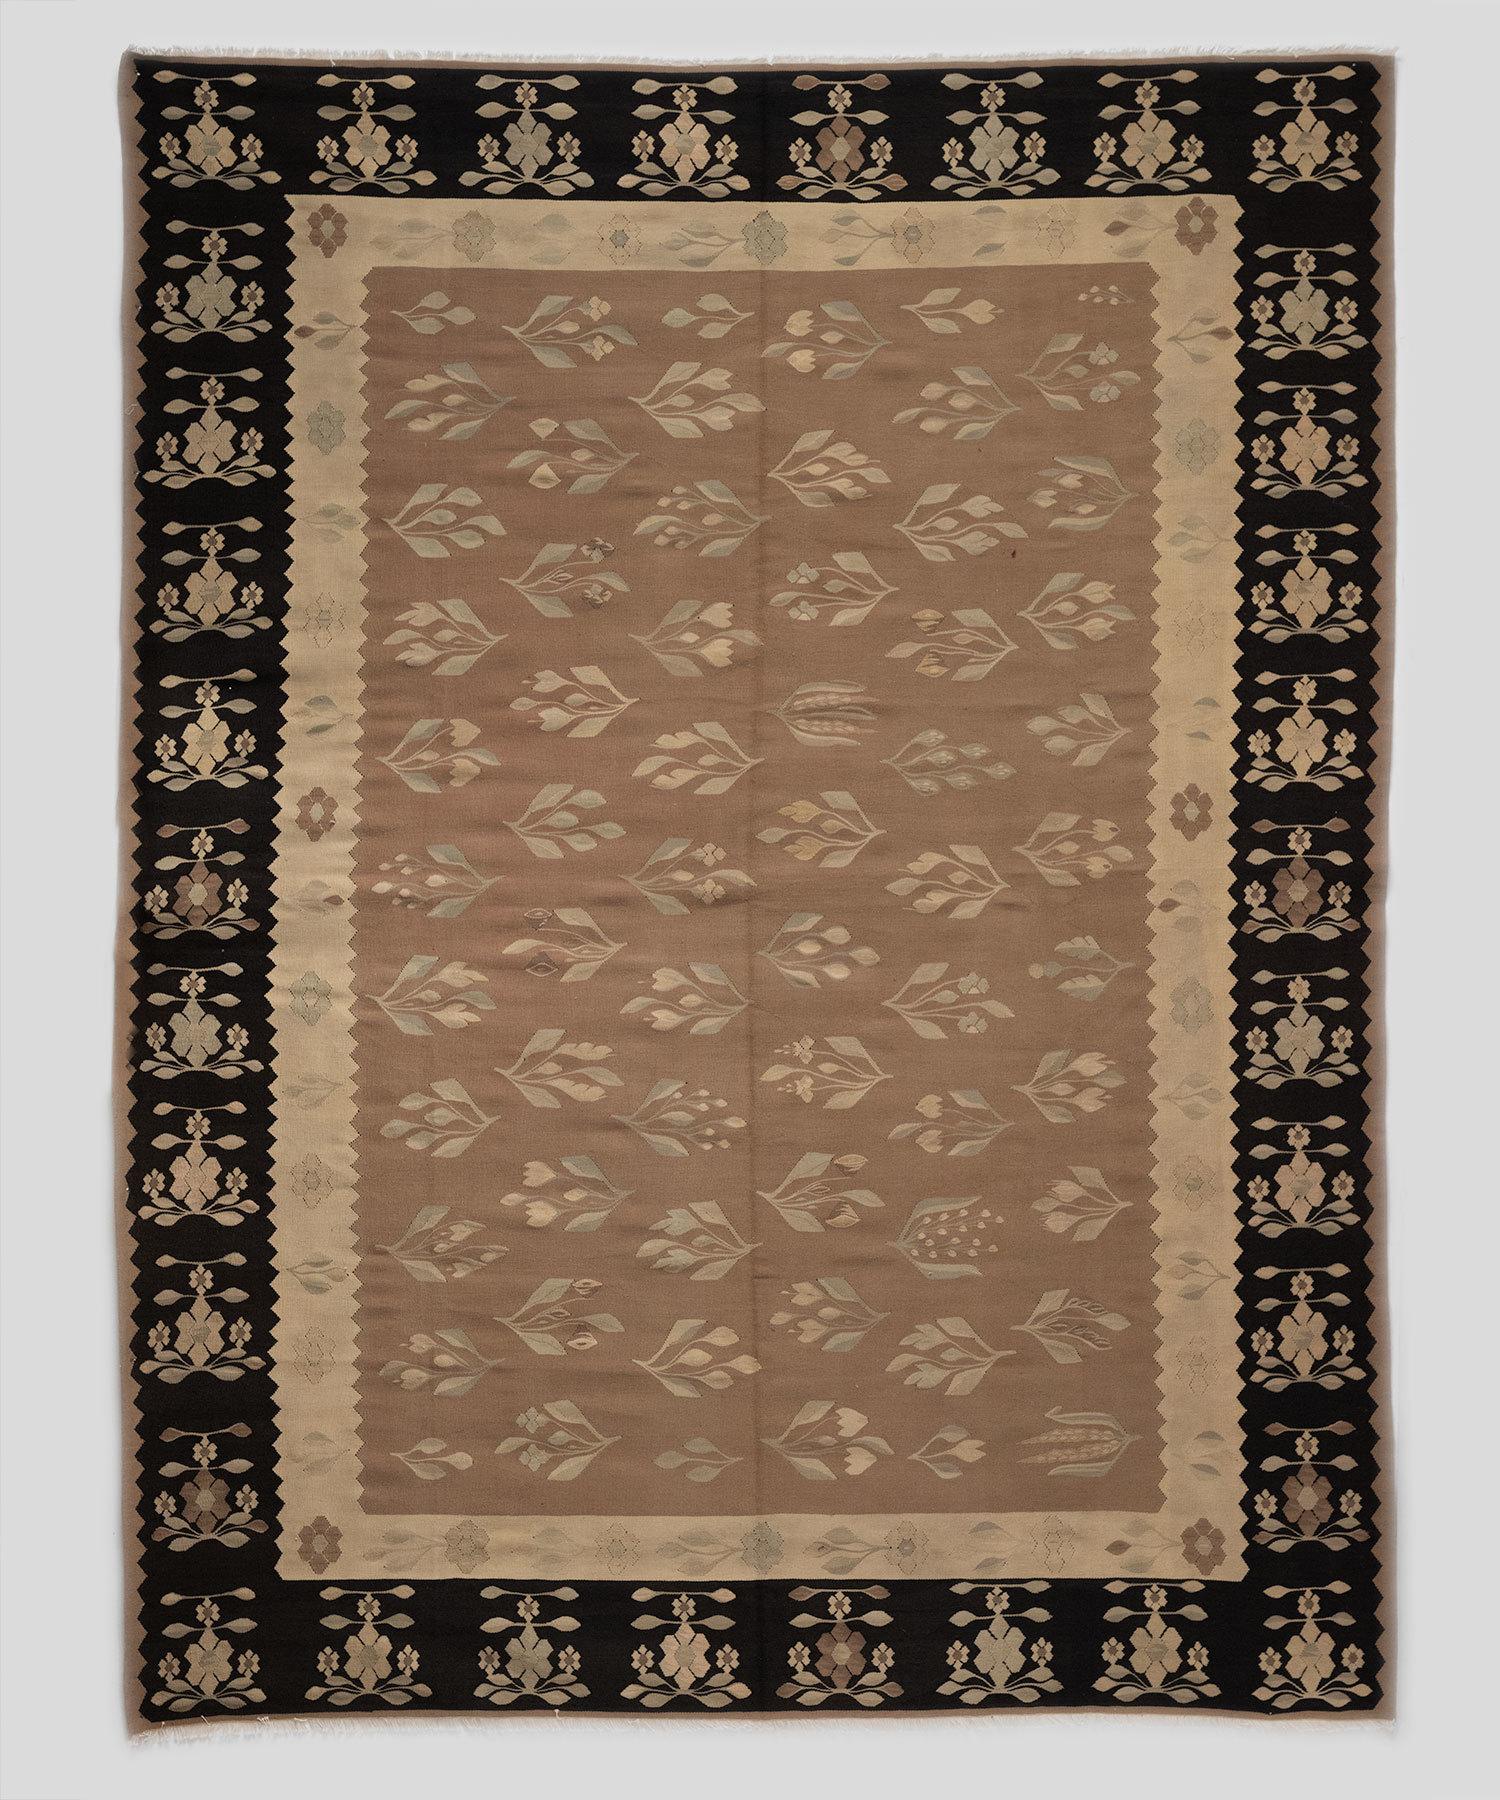 Floral motif Bessarabian Kilim, Romania, circa 1950

Handwoven floral motif with cream and chocolate tones and richly contrasting border.